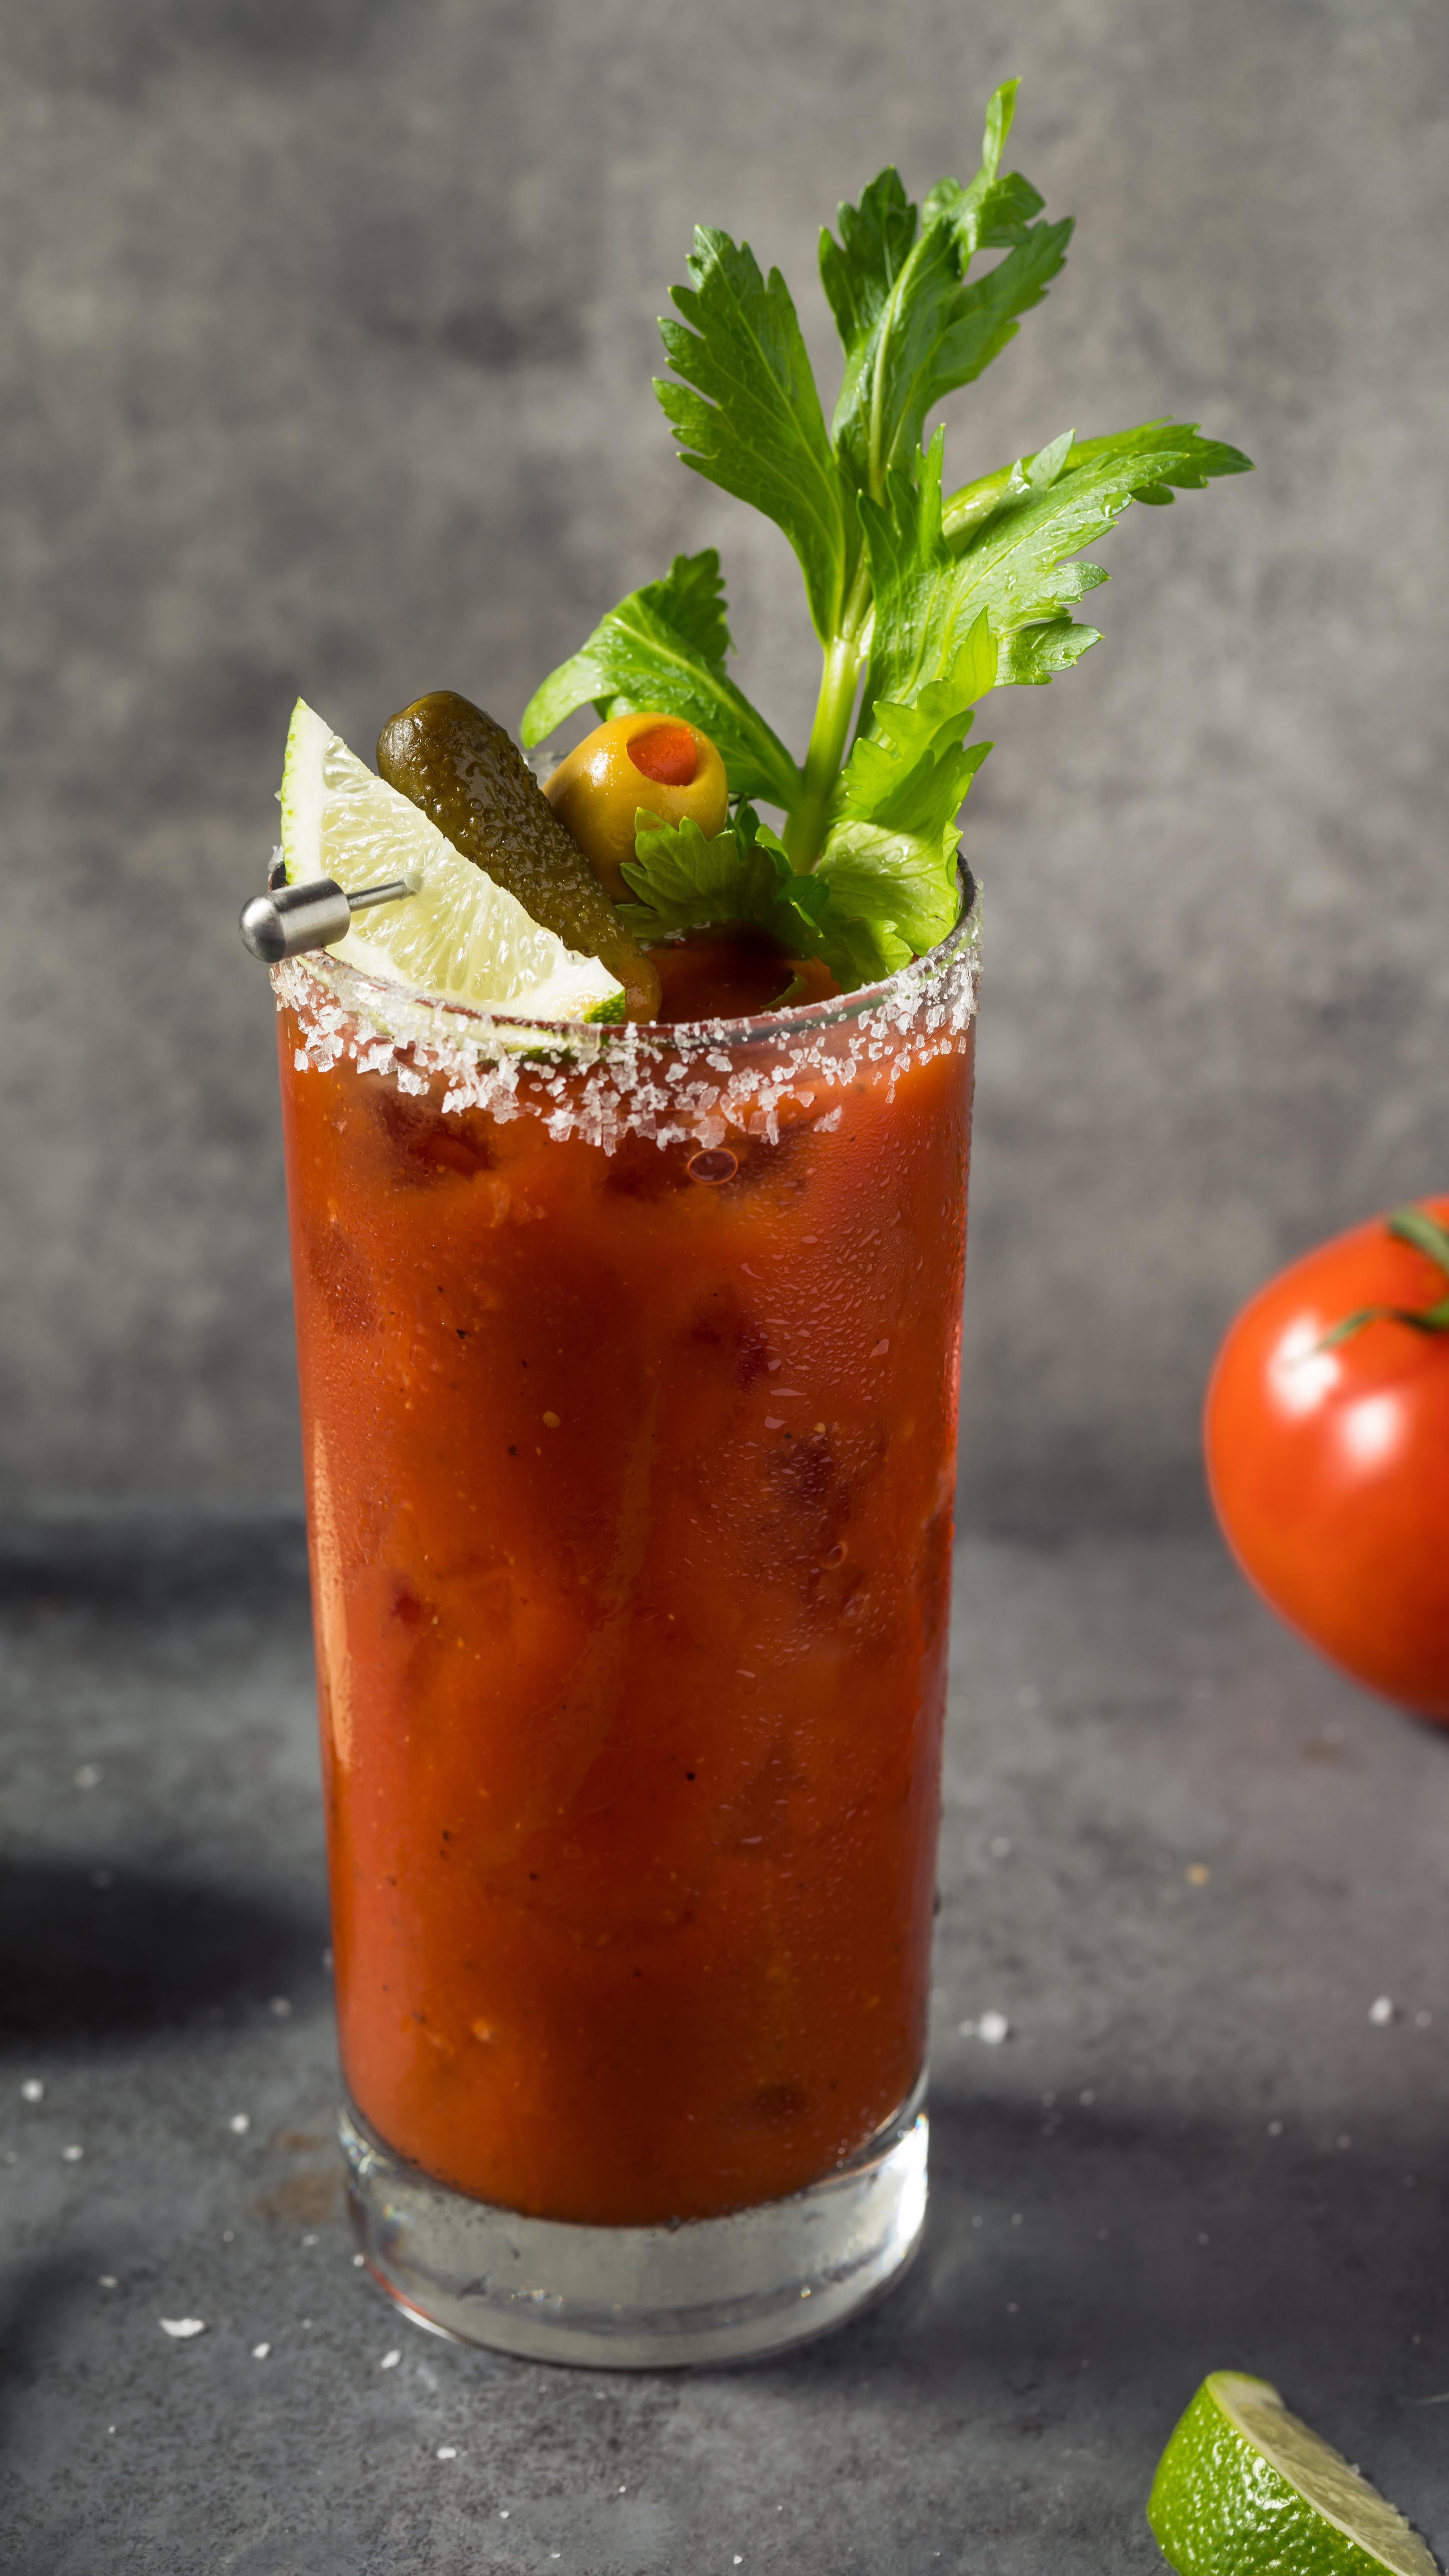 Spice up your next brunch with a Bloody Maria cocktail!

Ingredients:

1 1/2 oz. Tequila
1 1/2 oz. Bloody Maria mix**
 1/2 oz. Tomato Juice
  1/2 oz. Lemon Juice
 Celery stalk and lemon for garnish

**Bloody Maria Mix:
2 Tbsp. Black Pepper
2 Tbsp. Dijon Mustard
1 1/2 Cups Worcestershire Sauce
(Can you say “Worcestershire Sauce”?)
2 Tbsp. Horseradish
2 Tbsp. Celery Salt
1/8 Cup Maple Syrup
1 Tbsp. Smoked Paprika
1/2 Cup Cholula Hot Sauce
(Blend all ingredients)